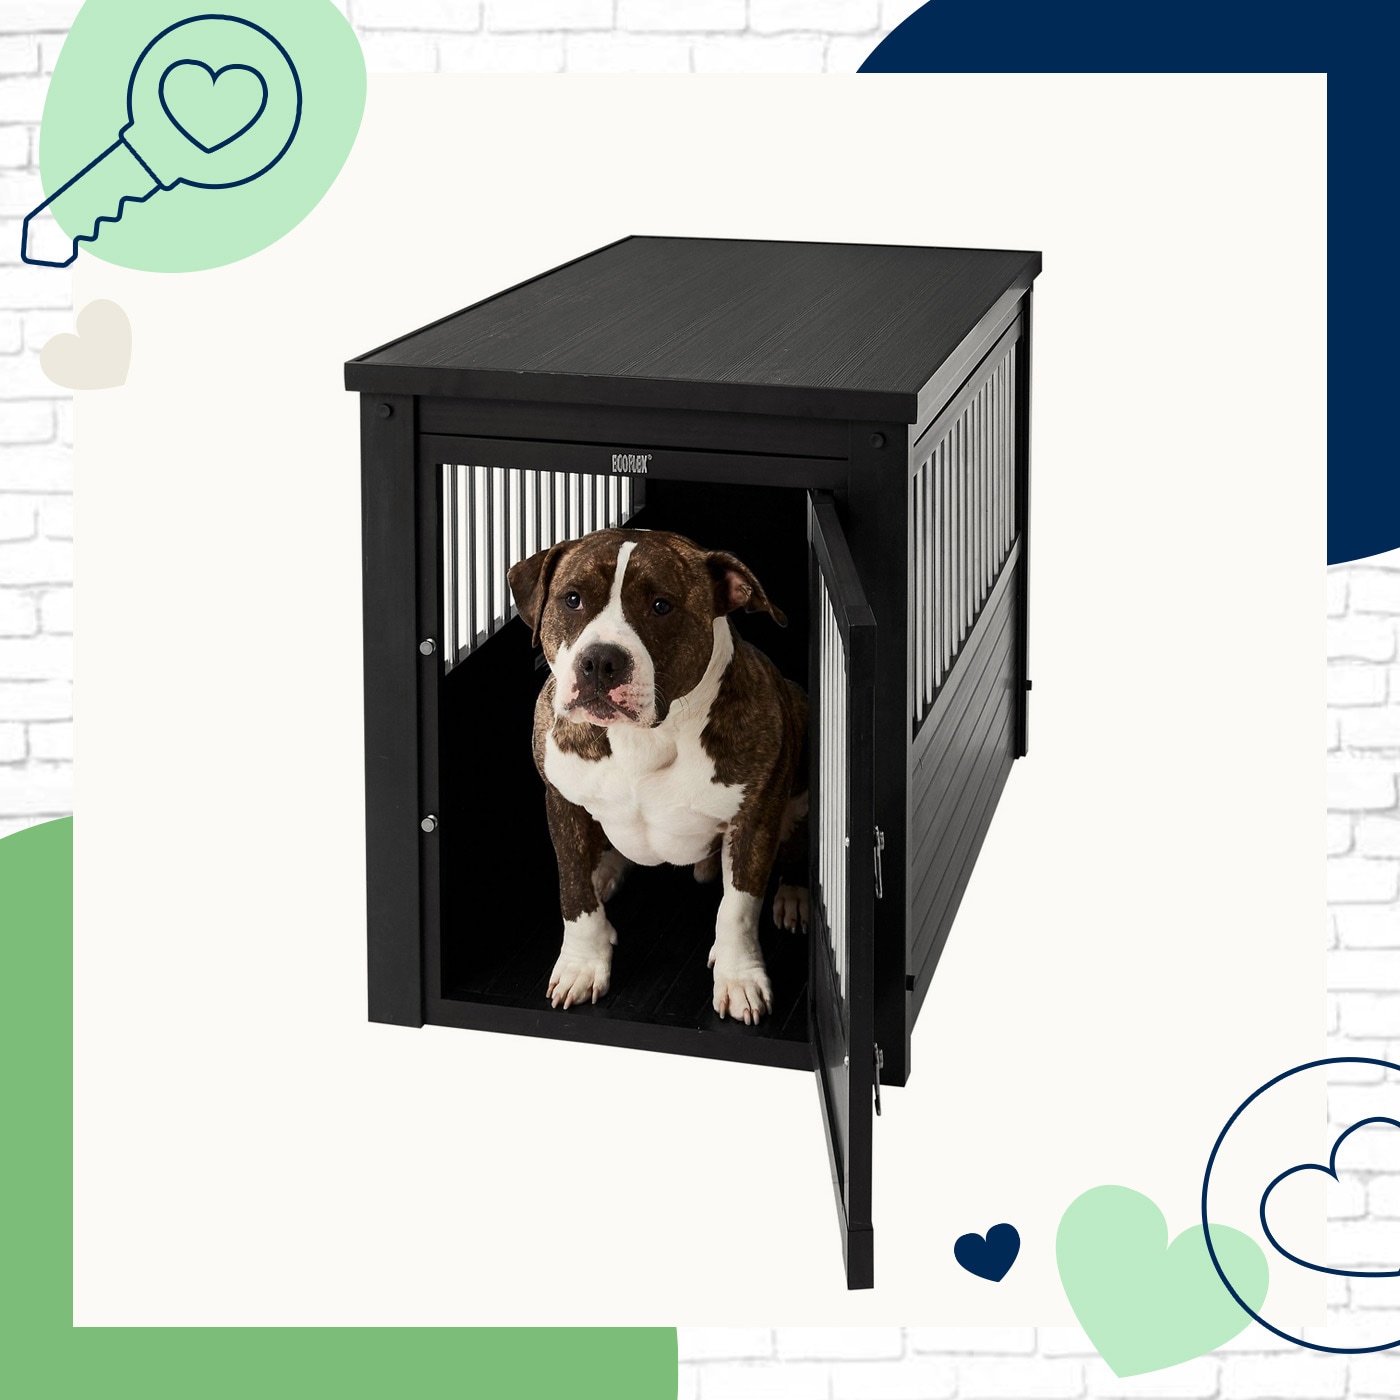 https://media-be.chewy.com/wp-content/uploads/2020/04/17092216/best-dog-crate-115478.jpg